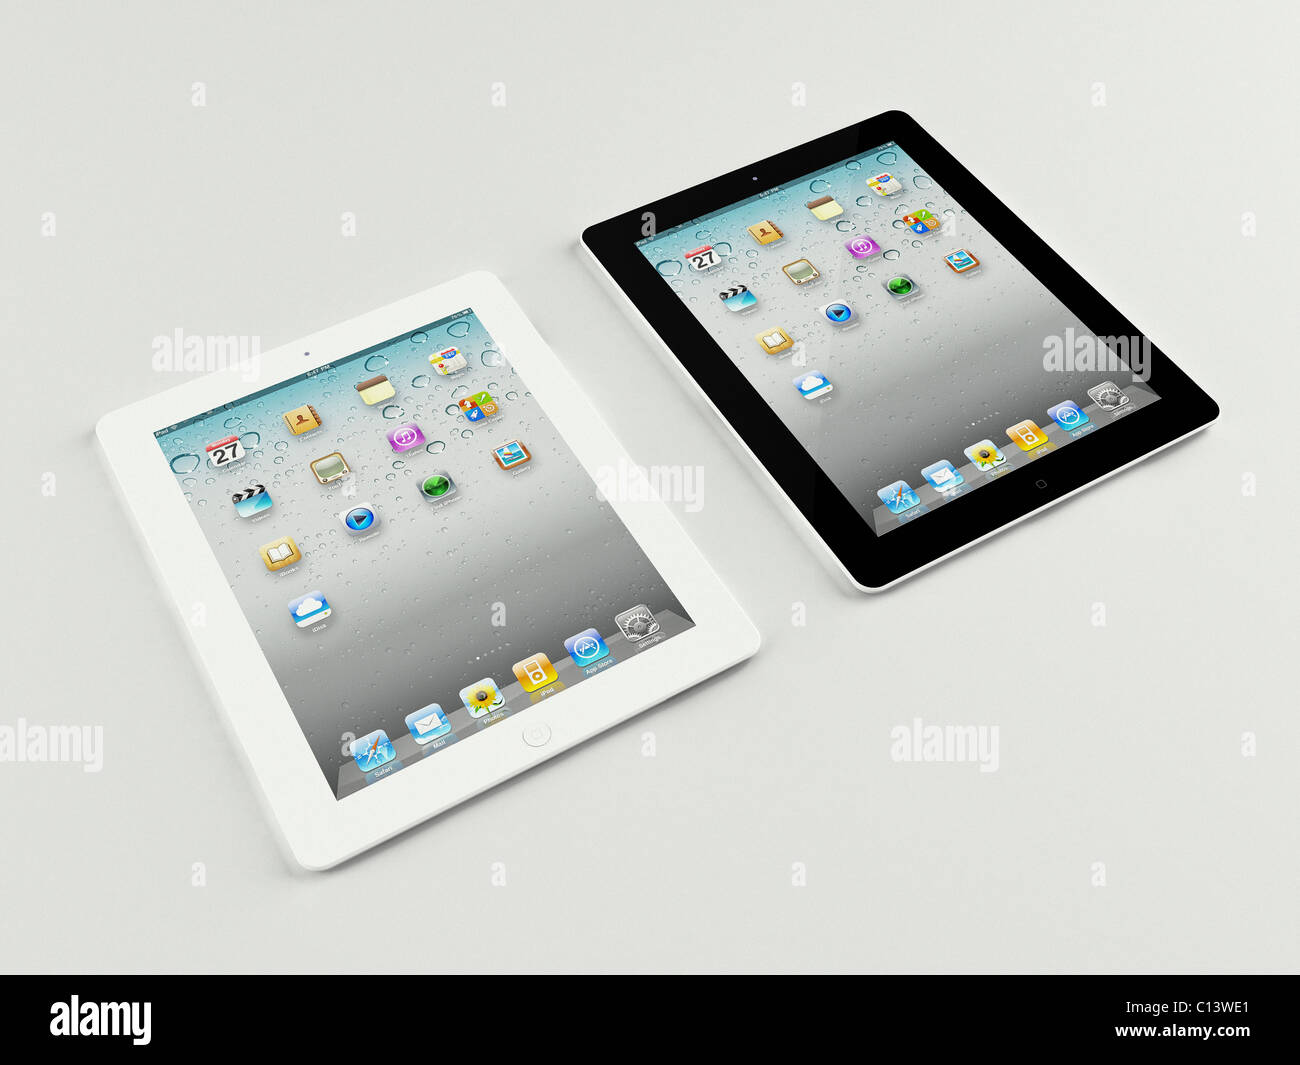 Ipad 2 on light grey background included cutout paths Stock Photo